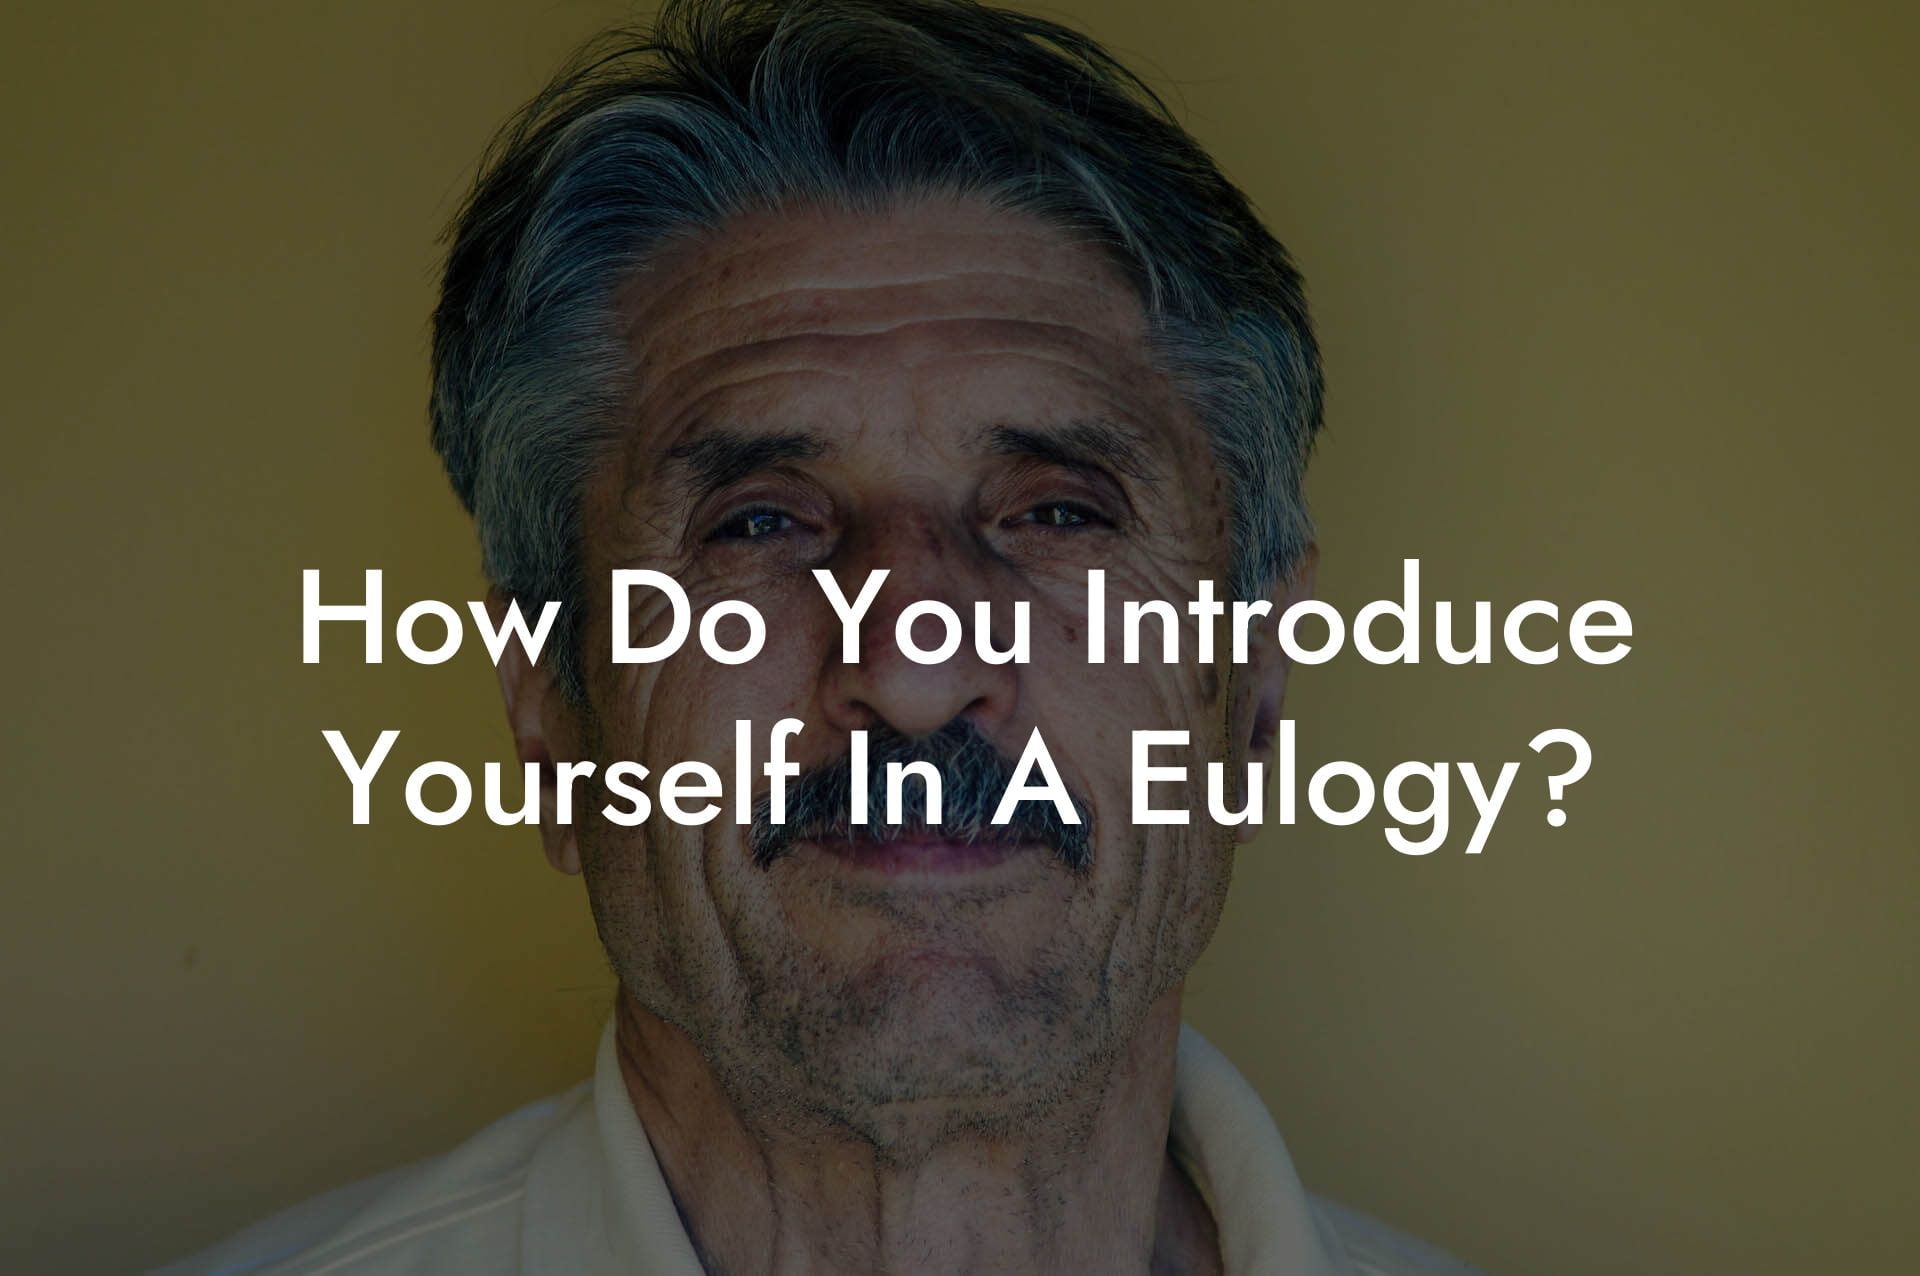 How Do You Introduce Yourself In A Eulogy?